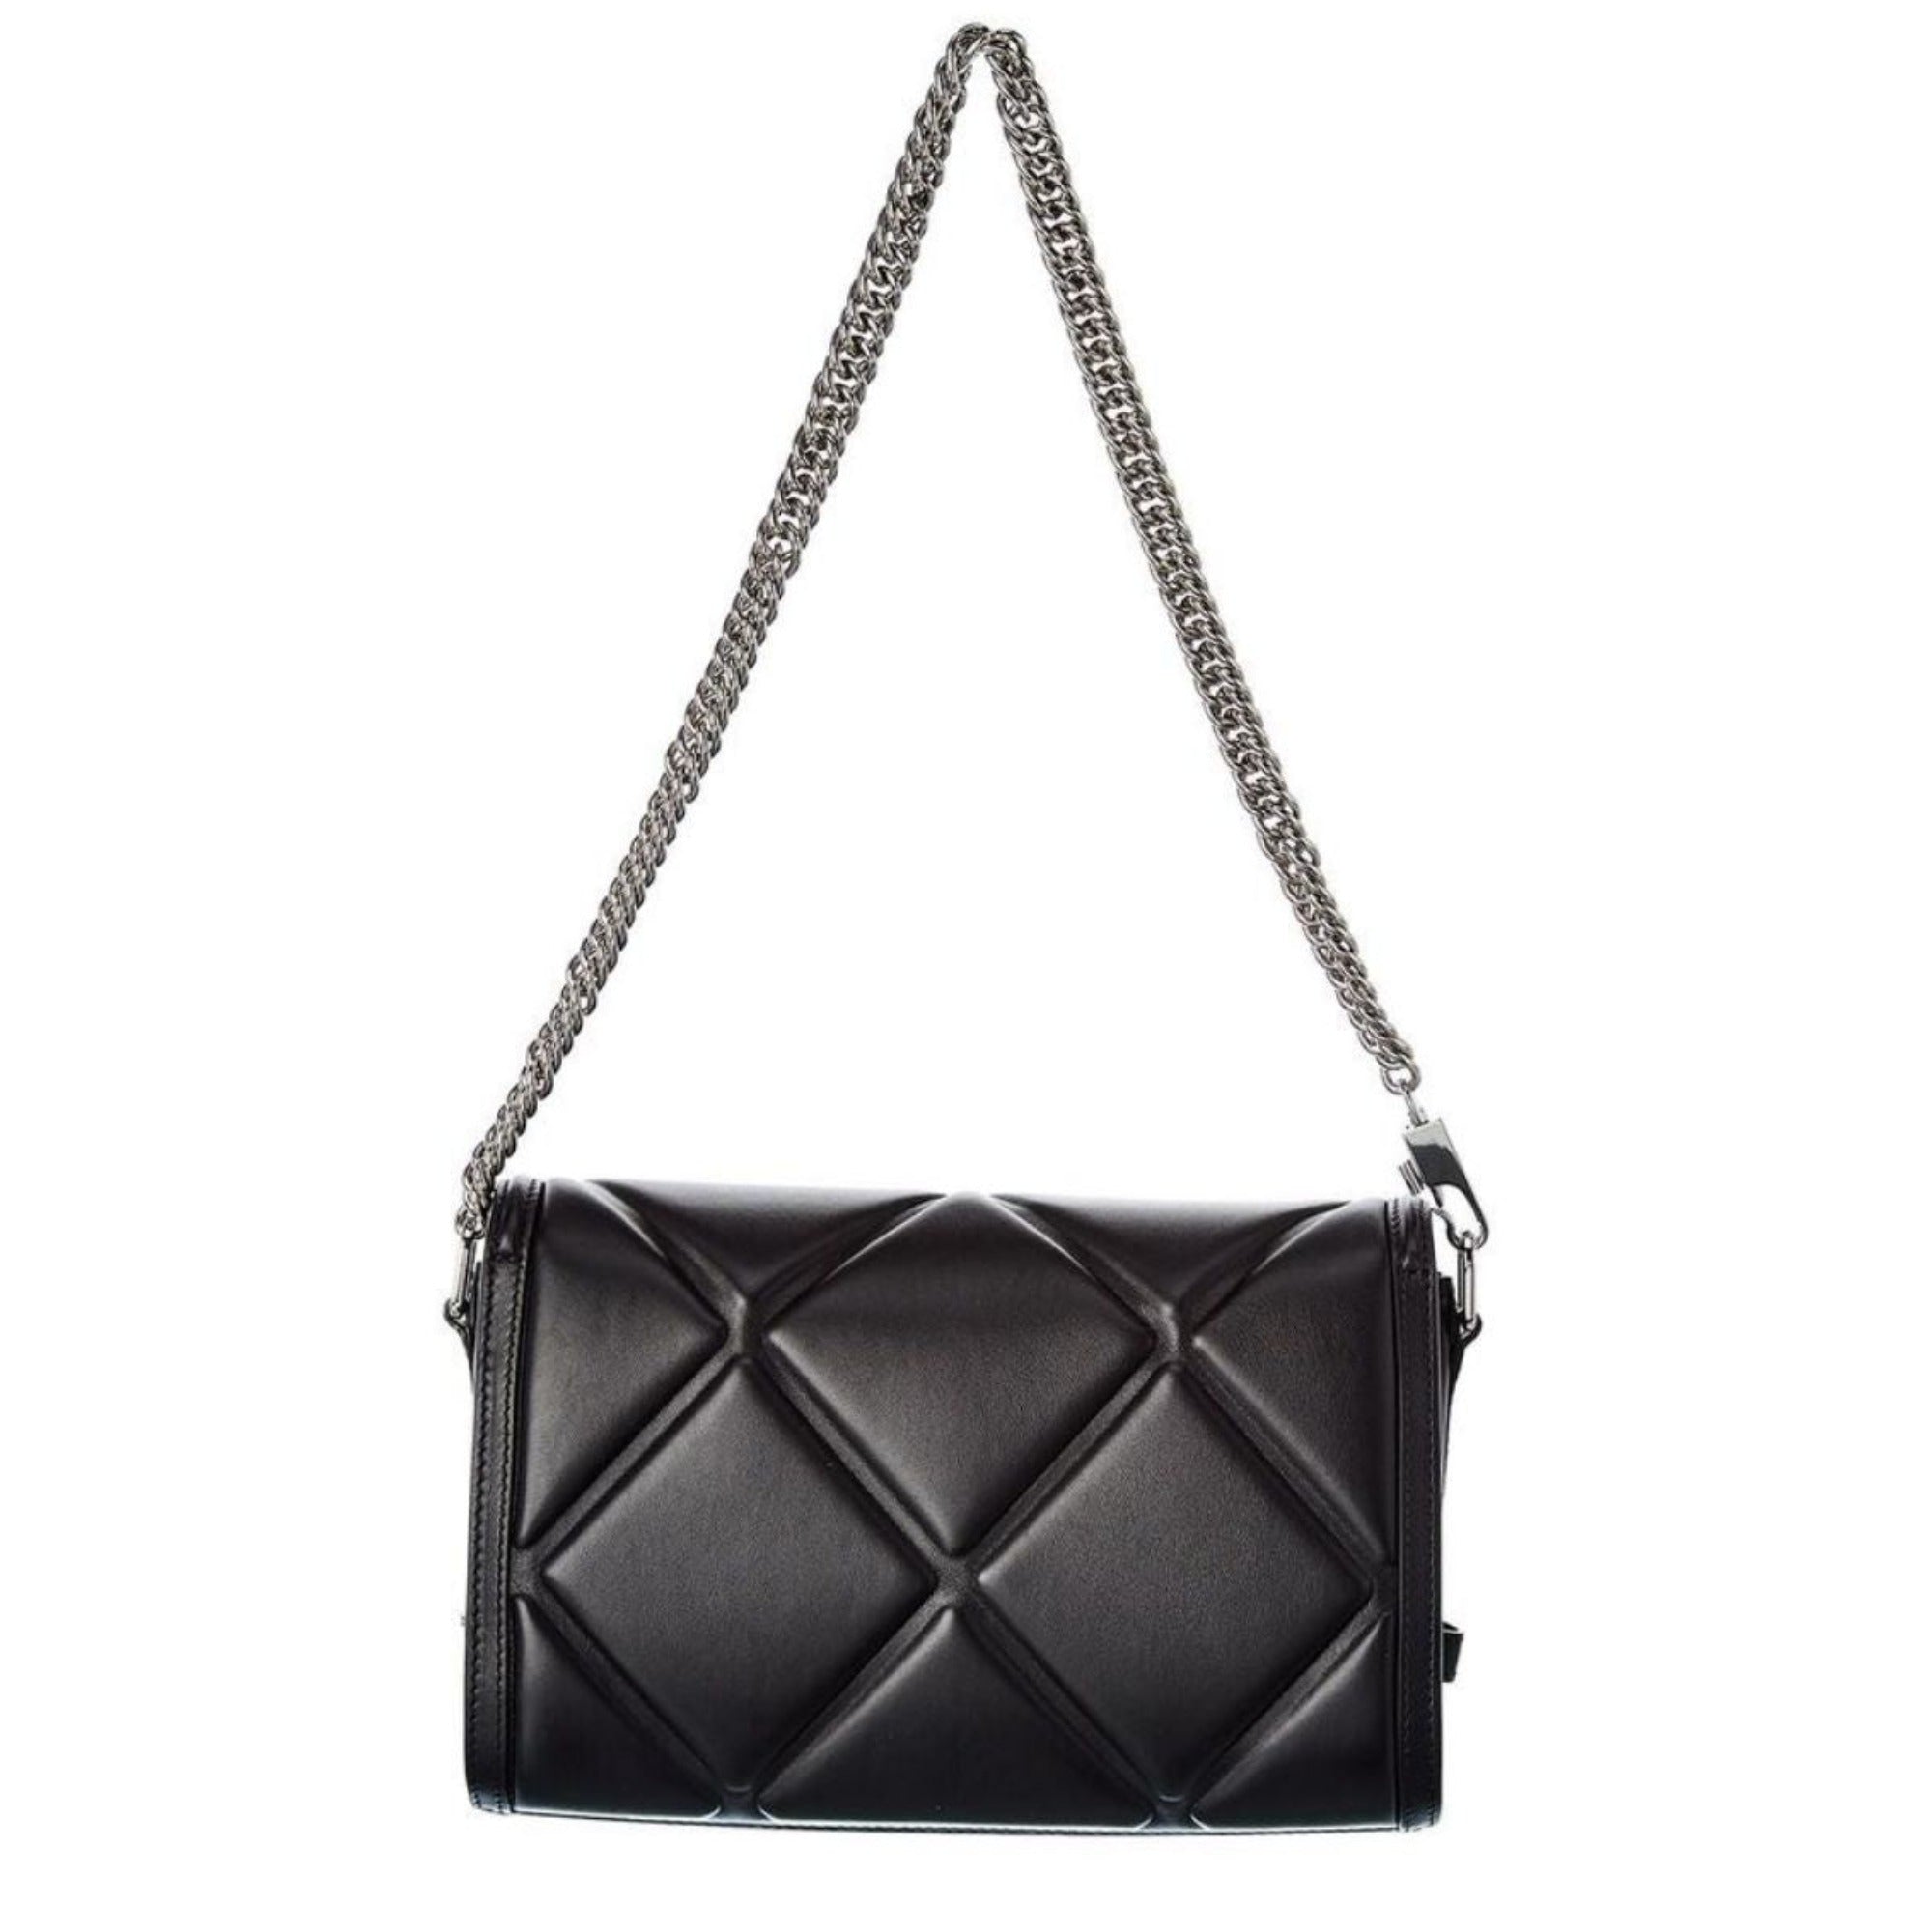 Alexander McQueen The Story Black Leather Quilted Shoulder Bag 631473 at_Queen_Bee_of_Beverly_Hills